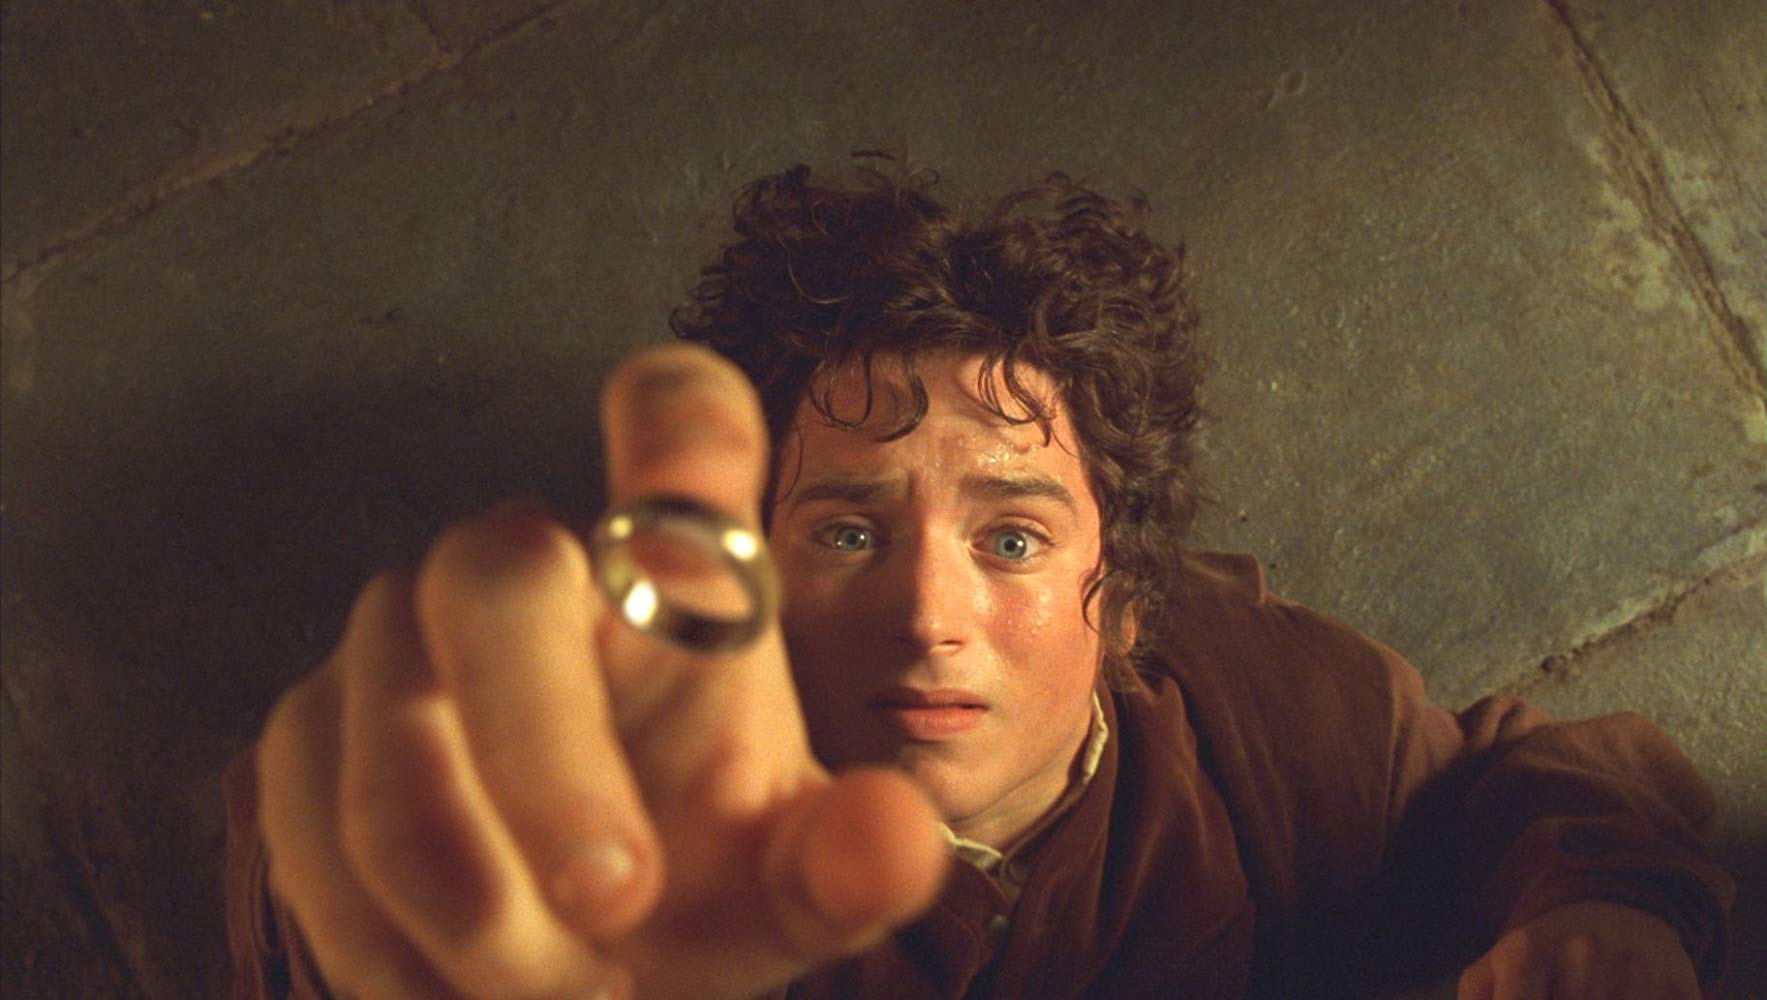 Elijah Wood in Lord of the Rings-The Fellowship of the Ring